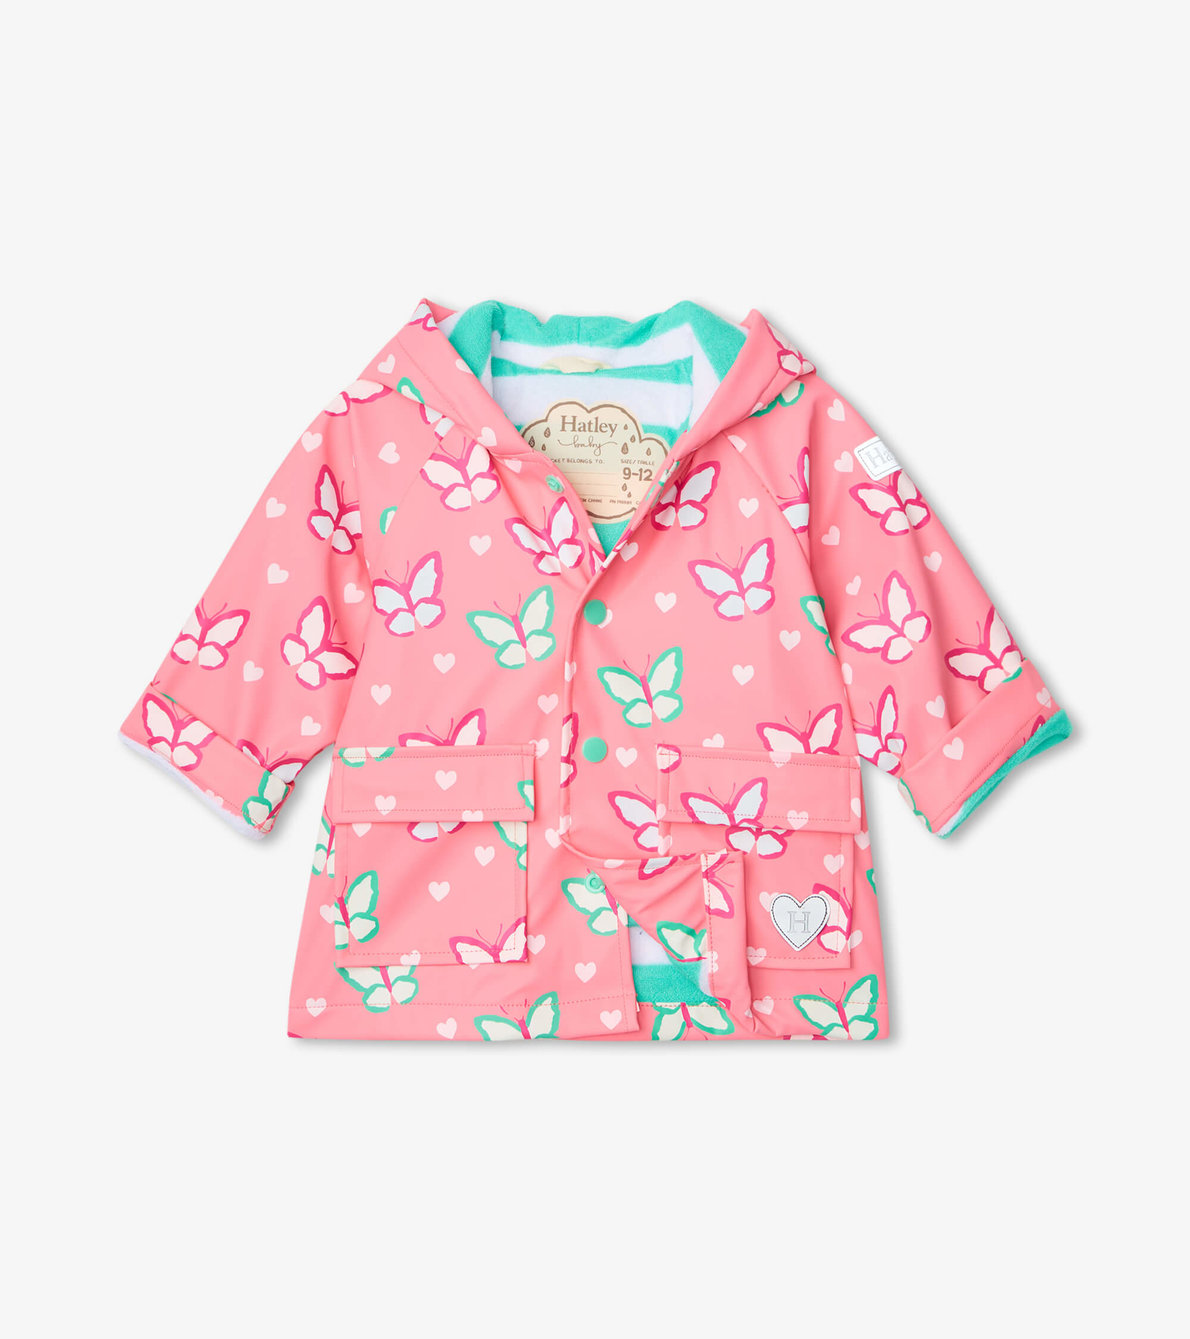 View larger image of Dainty Butterflies Colour Changing Baby Raincoat